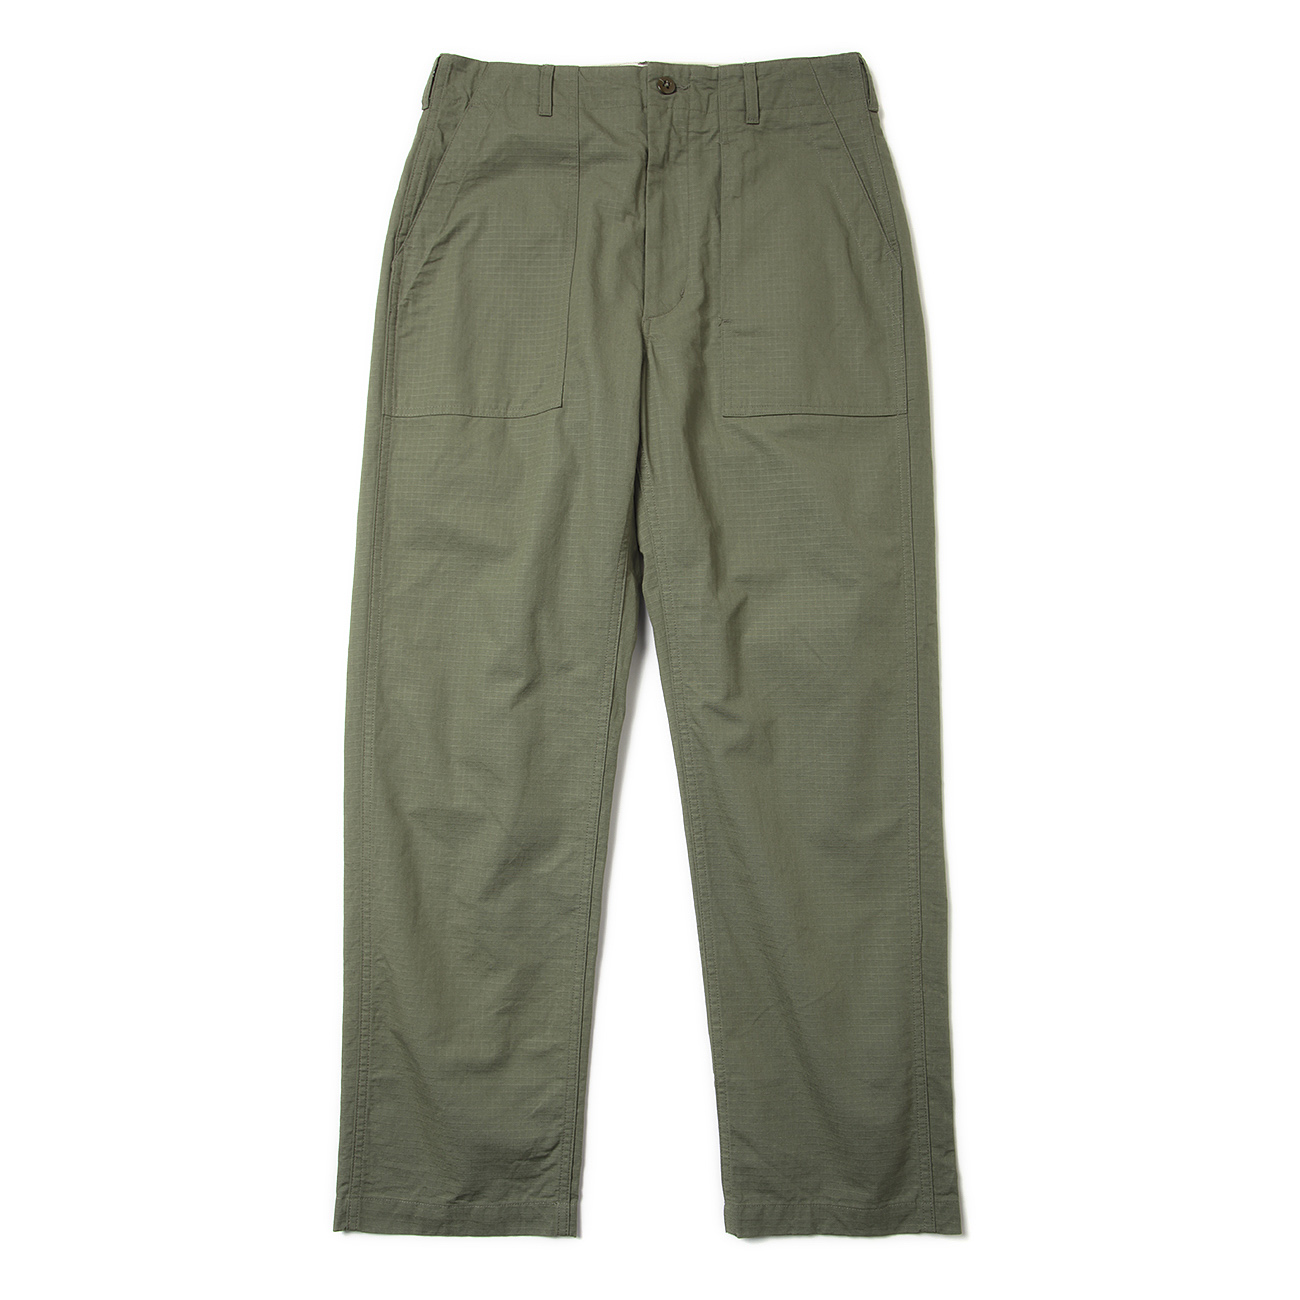 Fatigue Pant - Cotton Ripstop - Olive